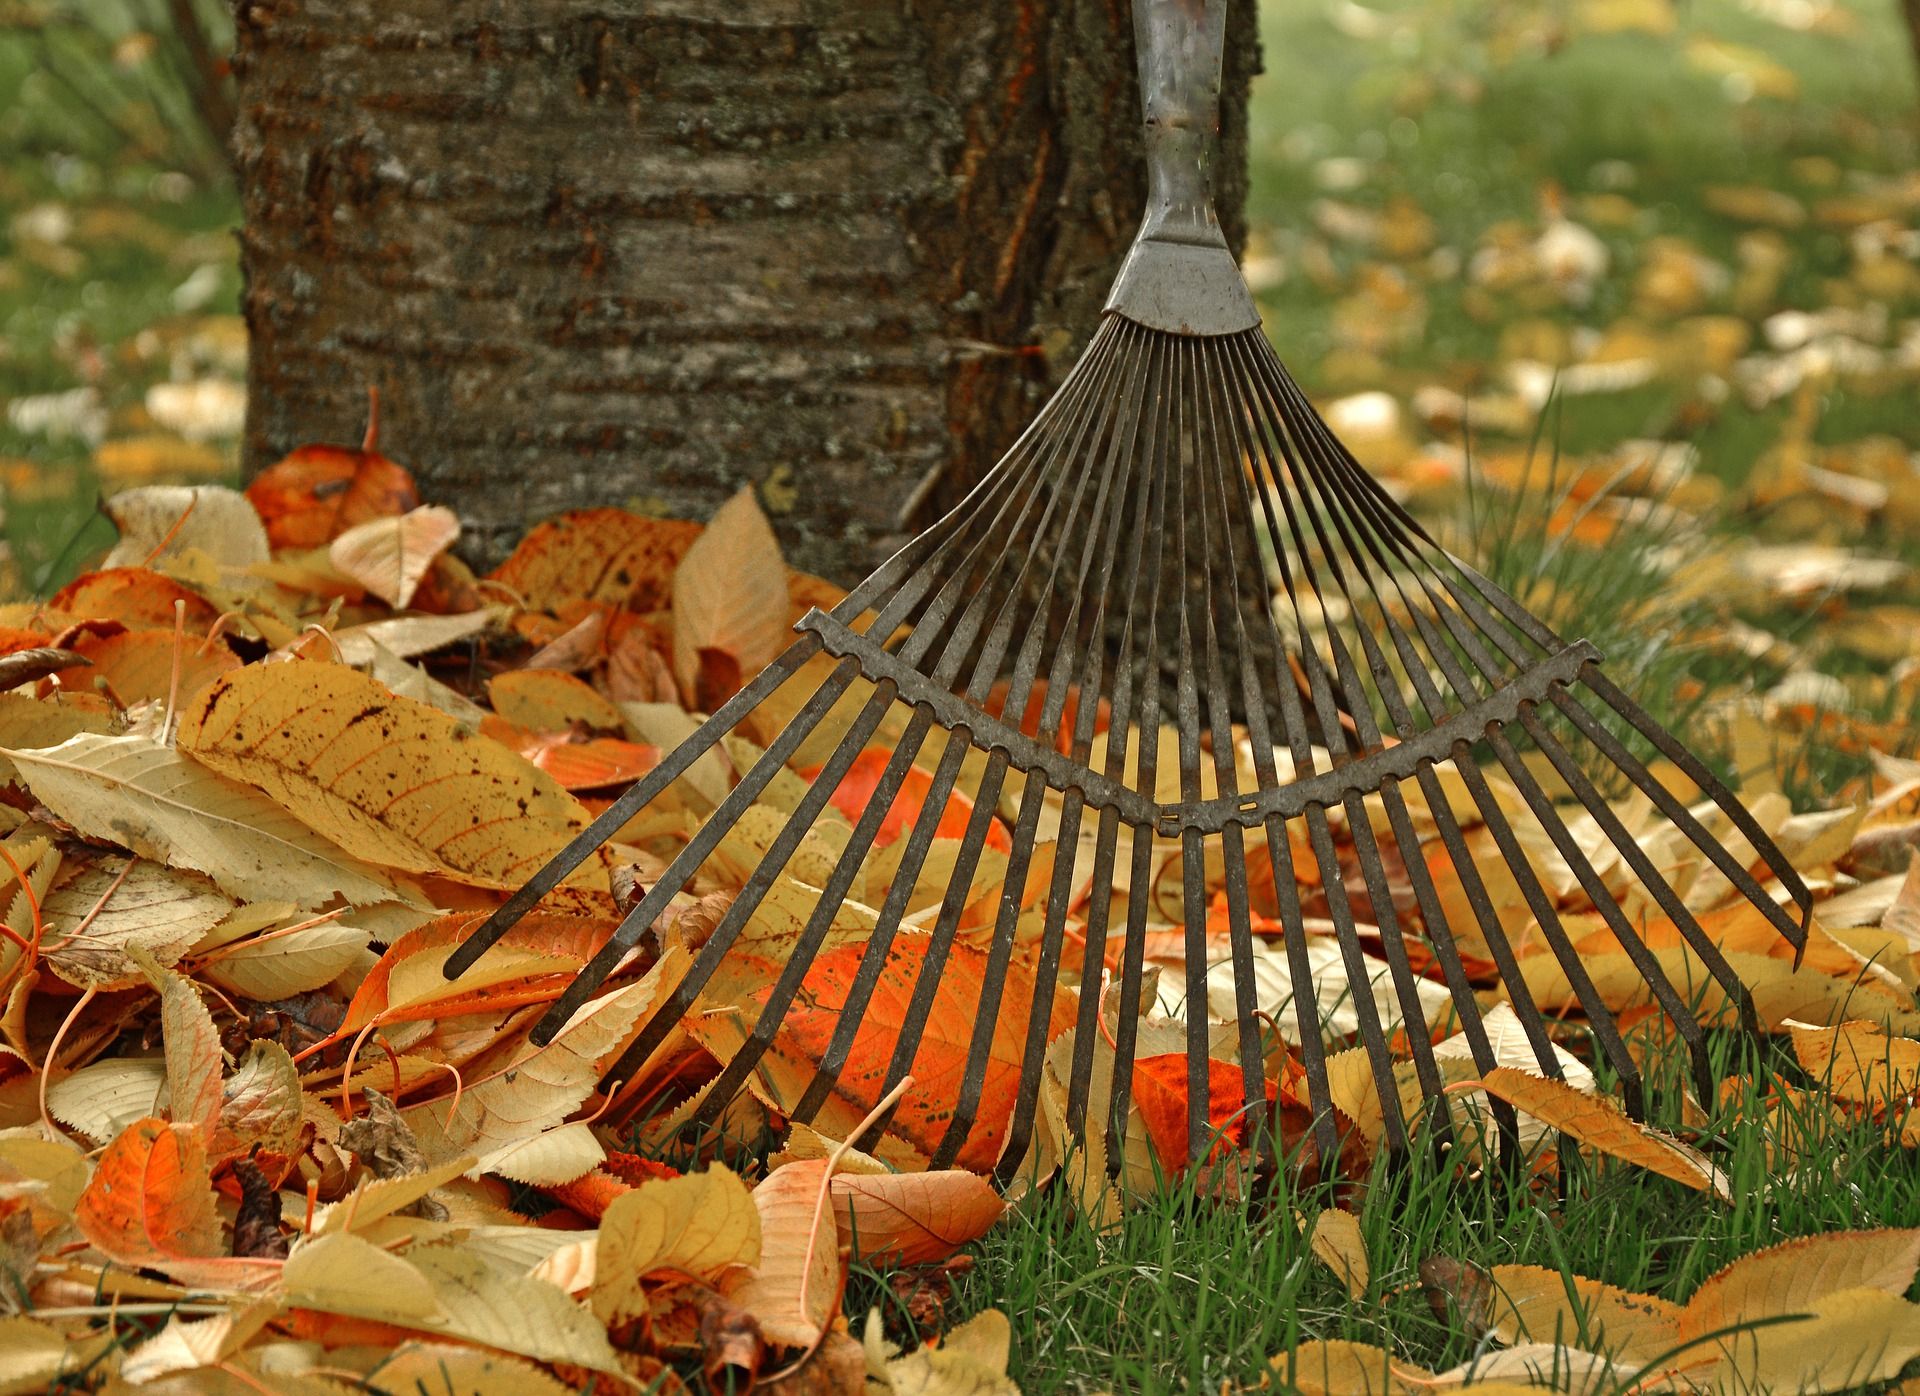 Raked up fall leaves